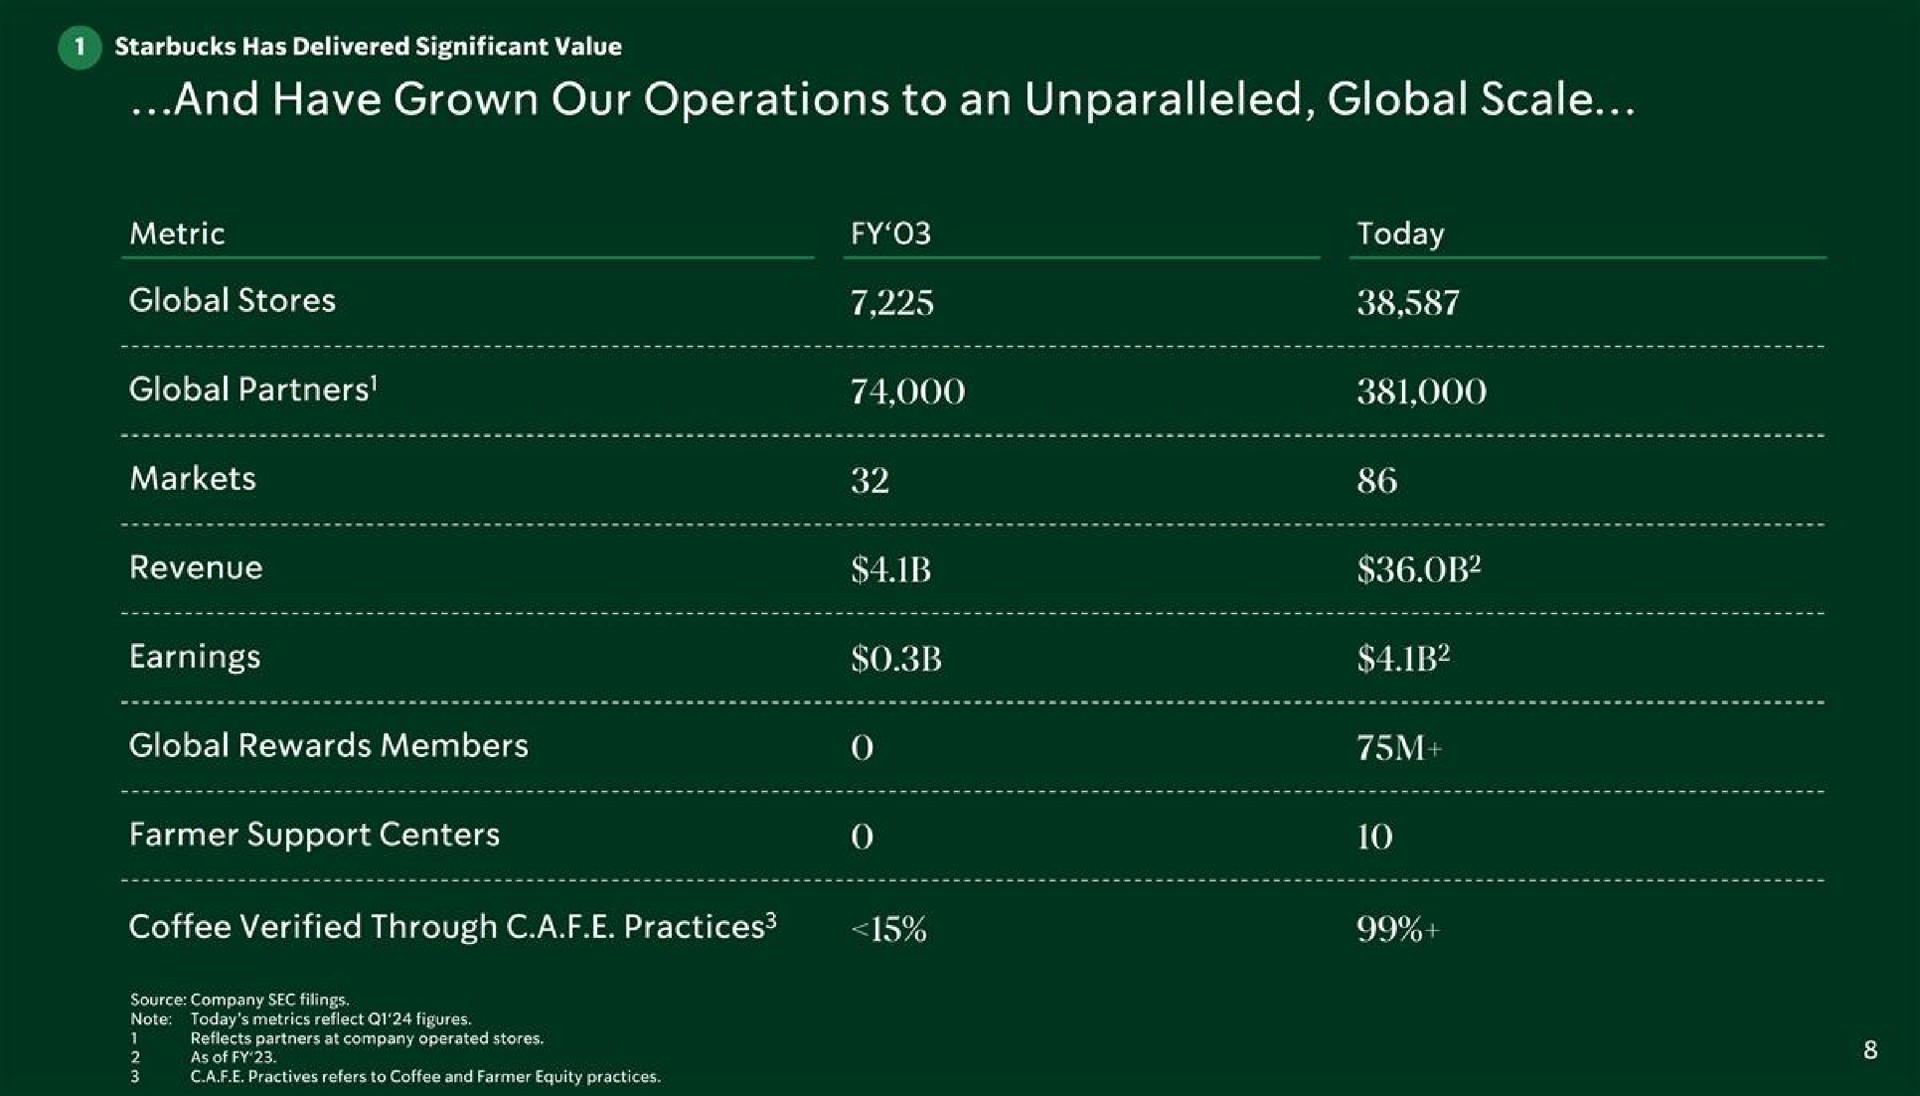 and have grown our operations to an unparalleled global scale soc revenue cran on tater | Starbucks